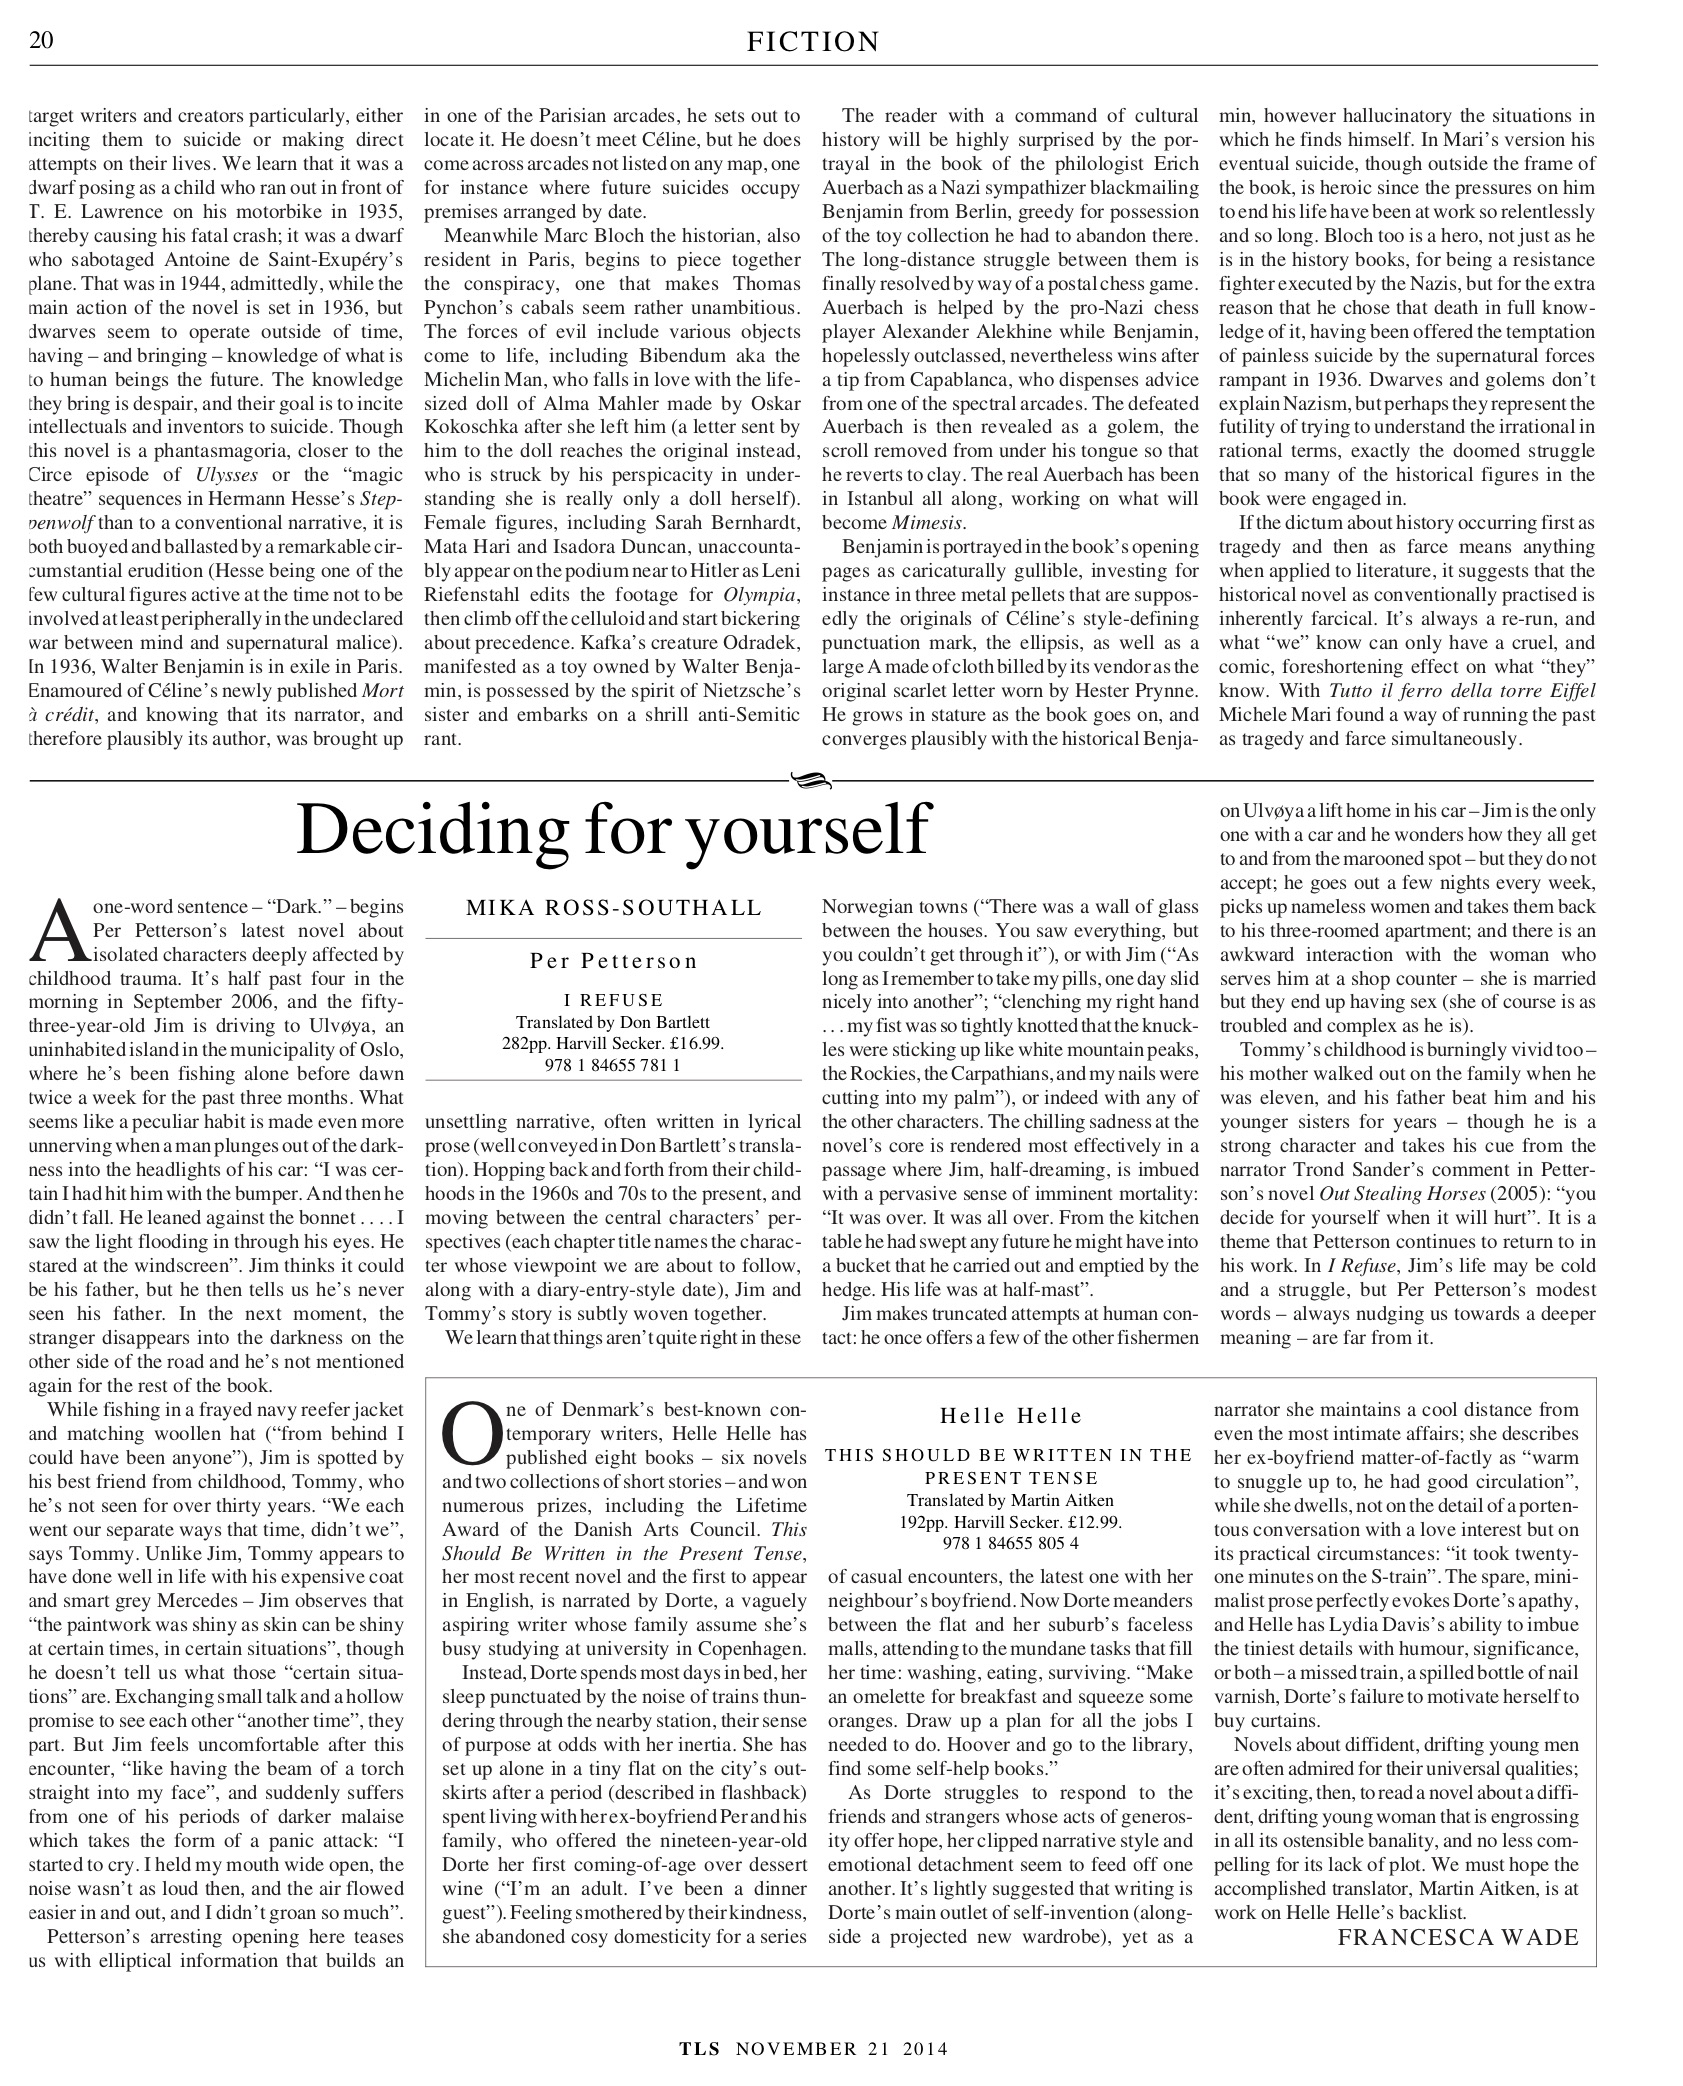 The Times Literary Supplement, 21 November 2014. "Deciding for yourself, Per Petterson"